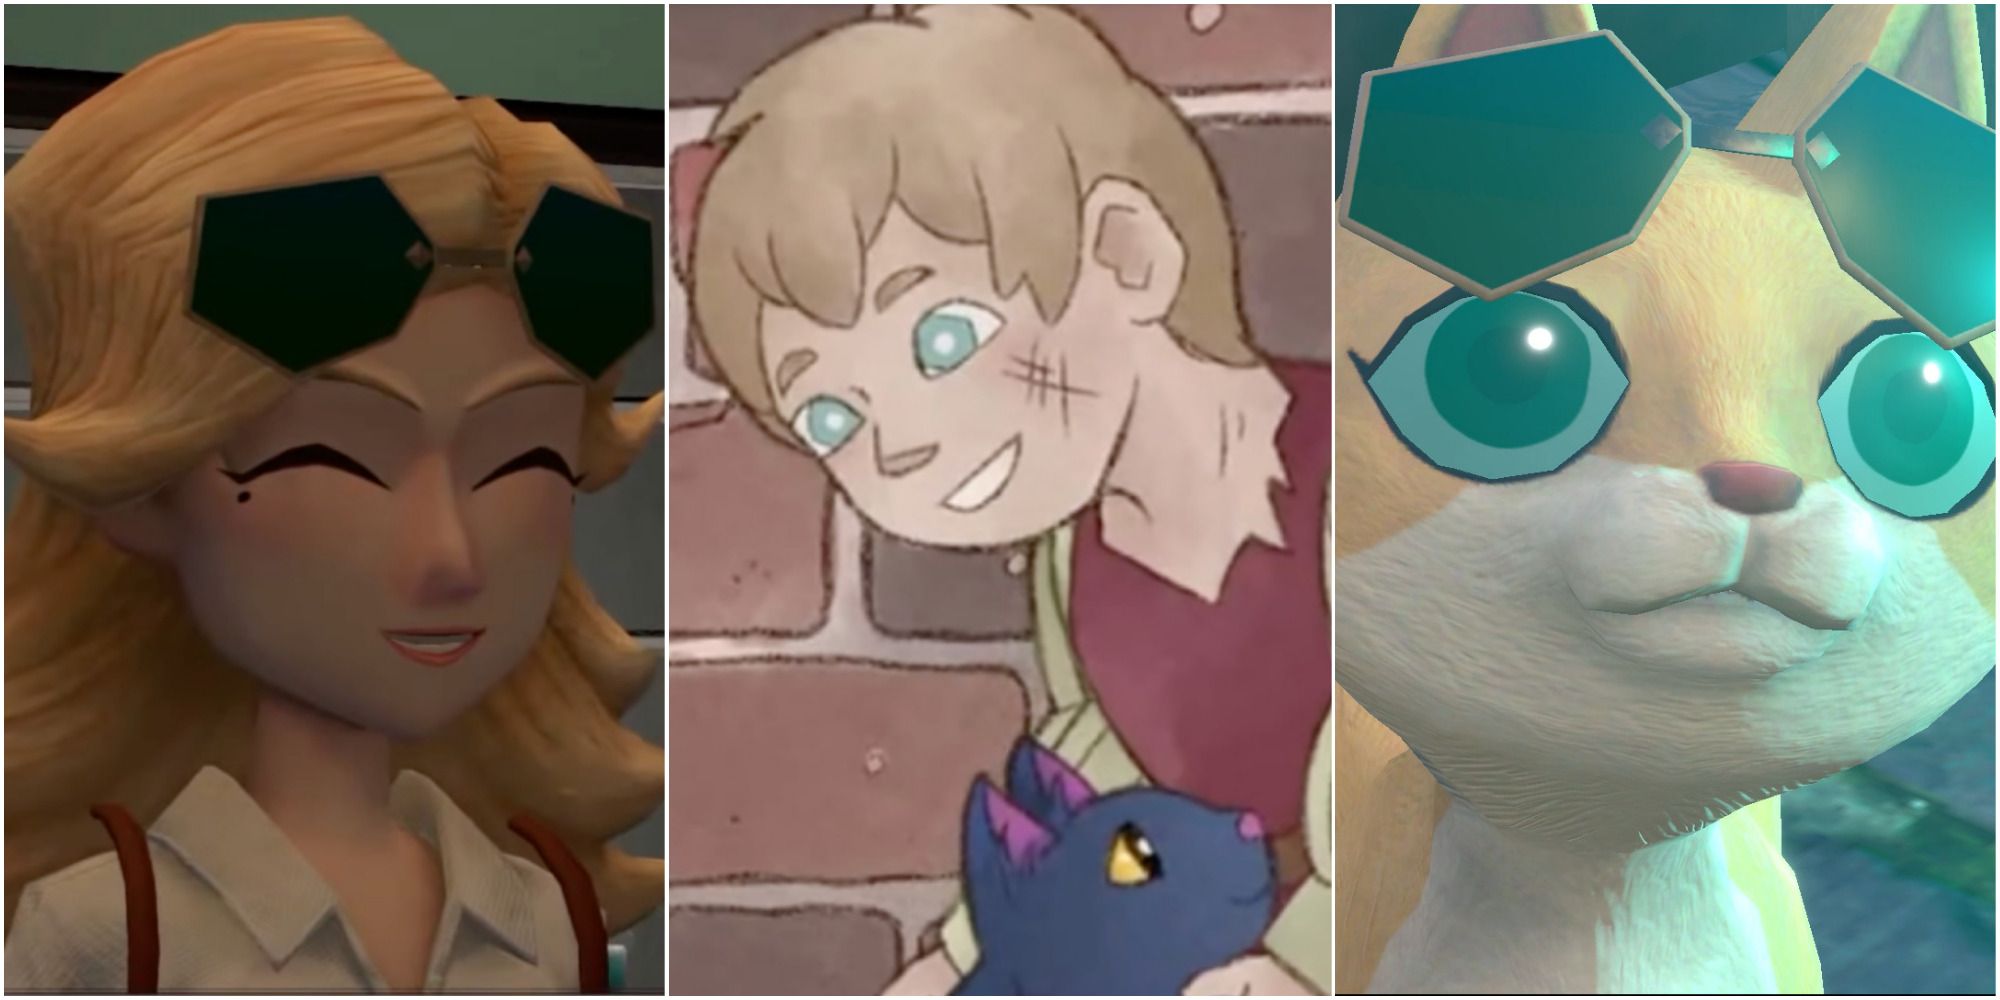 Three images from The Good Life collaged, showing Naomi smiling; Dick Whittington petting his cat; and Naomi as a cat gazing at a magical light